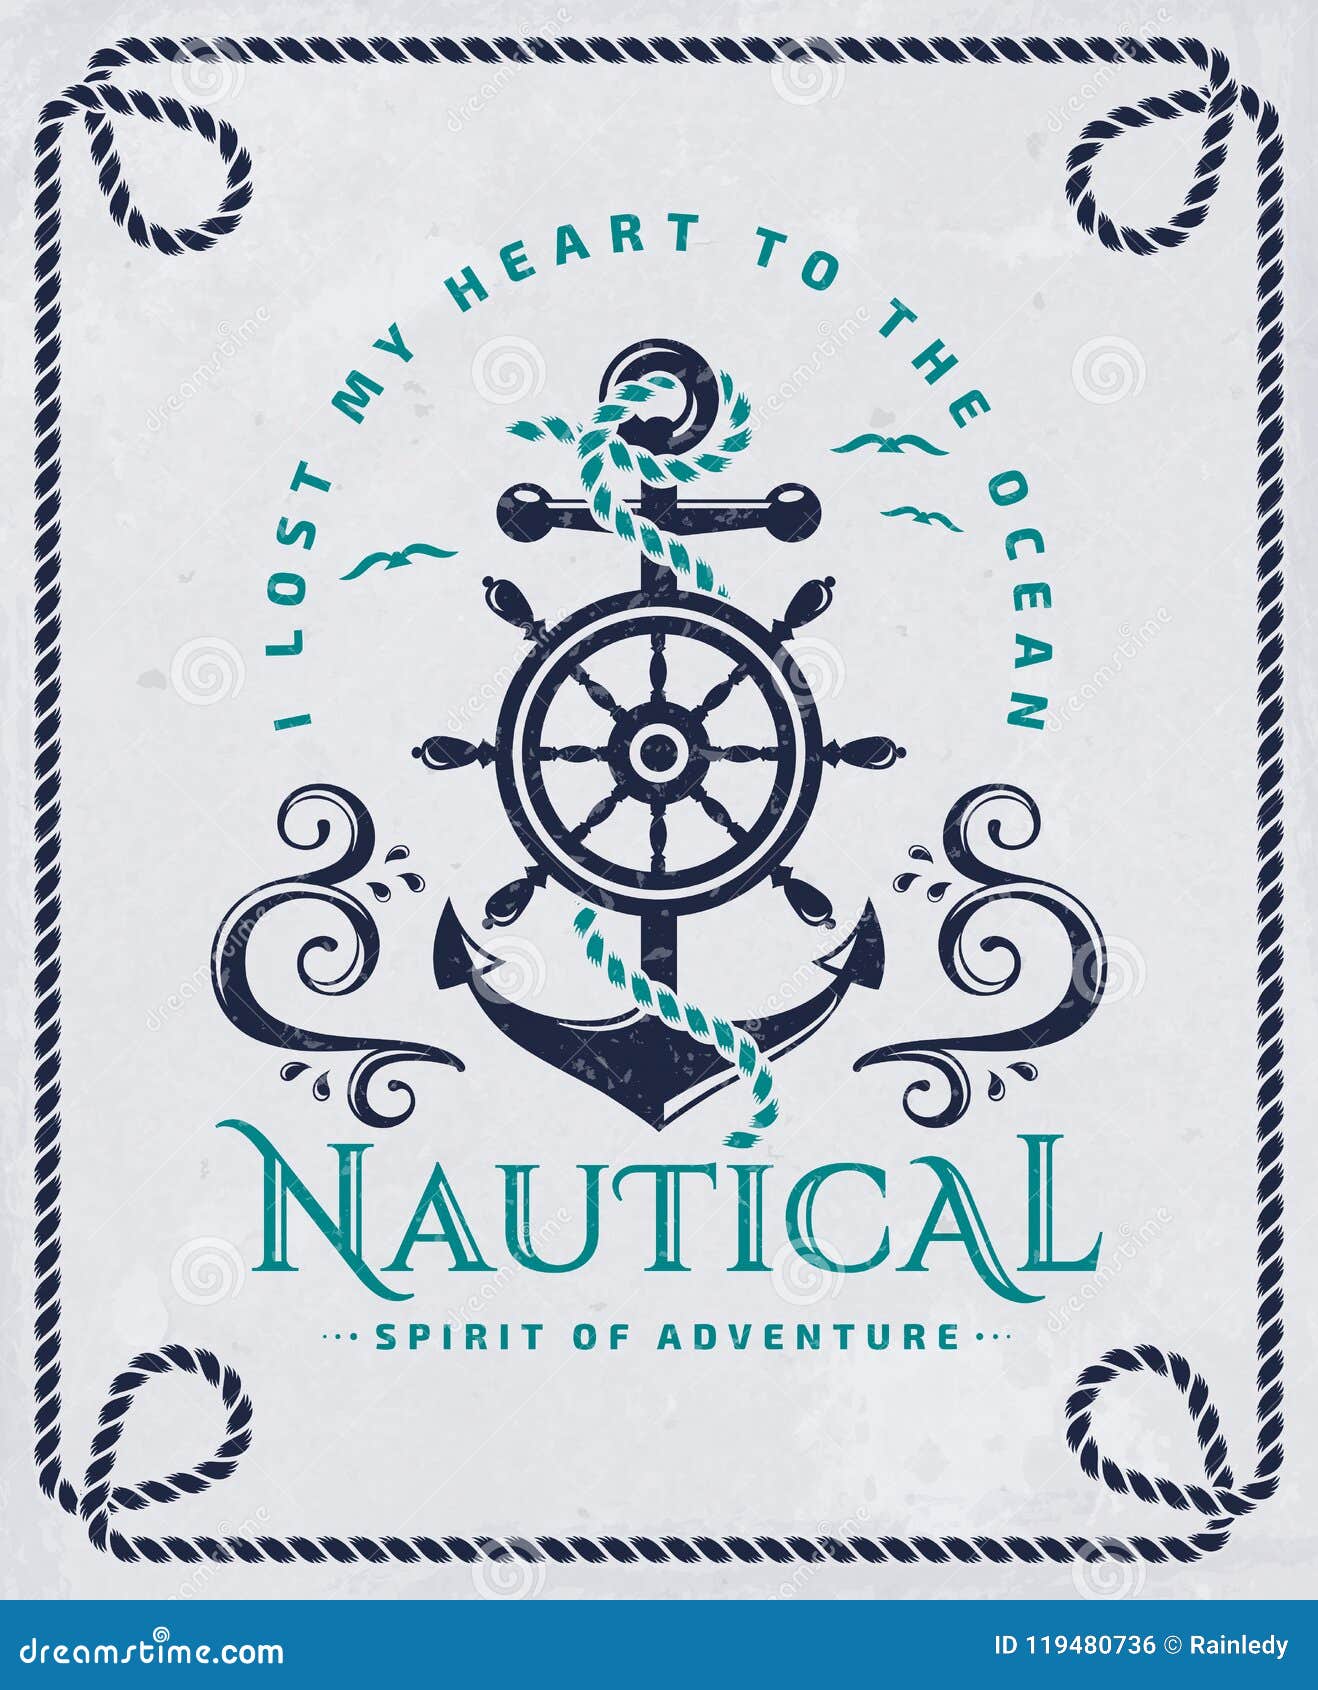 nautical poster with anchor, steering wheel and rope frame.